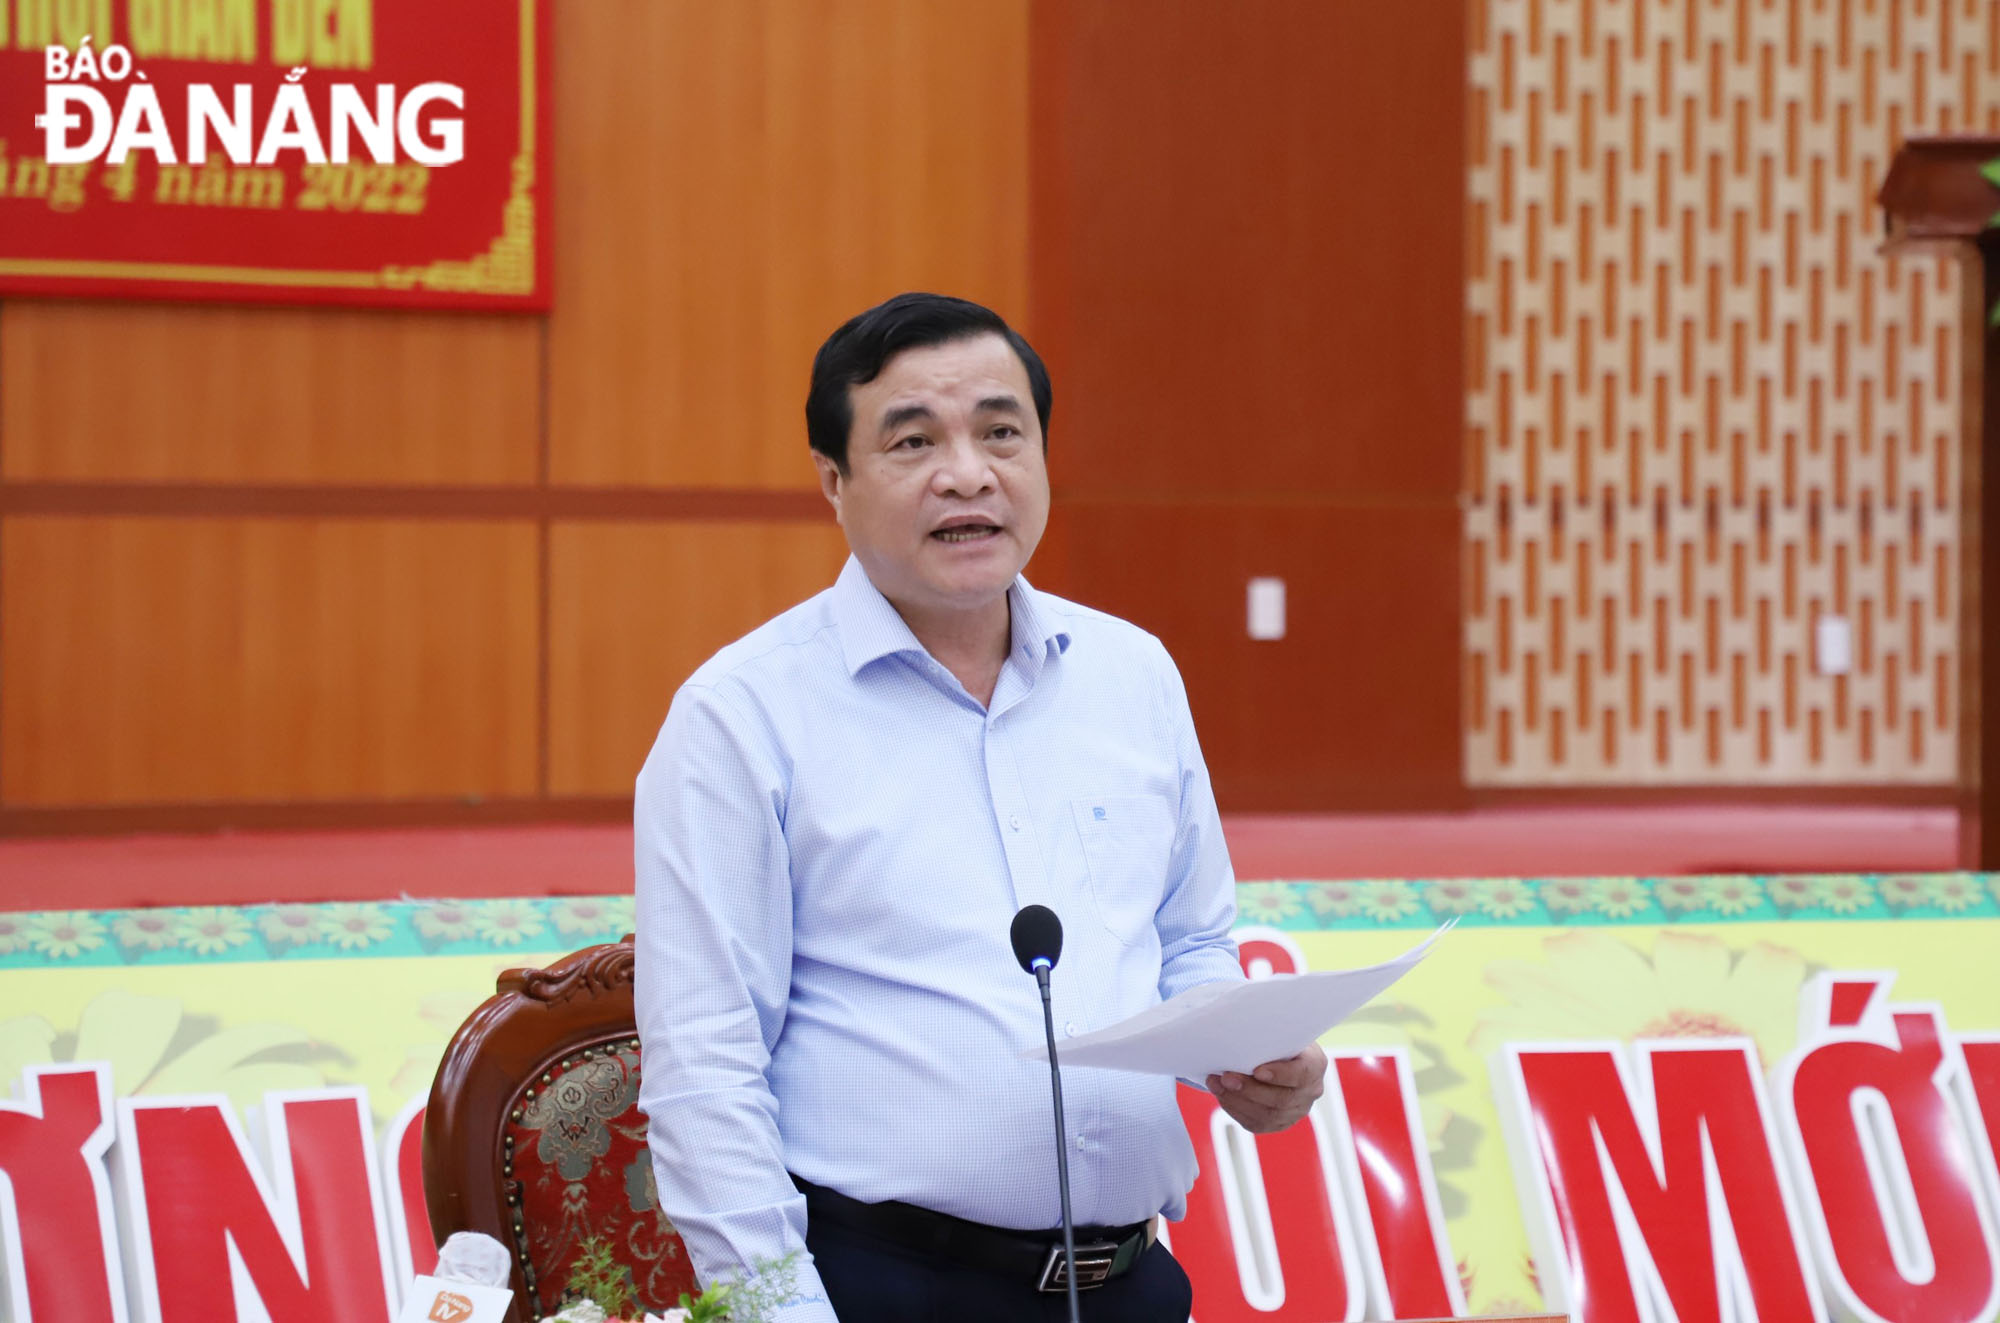 Quang Nam Provincial Party Committee Secretary Phan Viet Cuong delivers a speech at the meeting with the Da Nang leaders, April 25, 2022. Photo: NGOC PHU